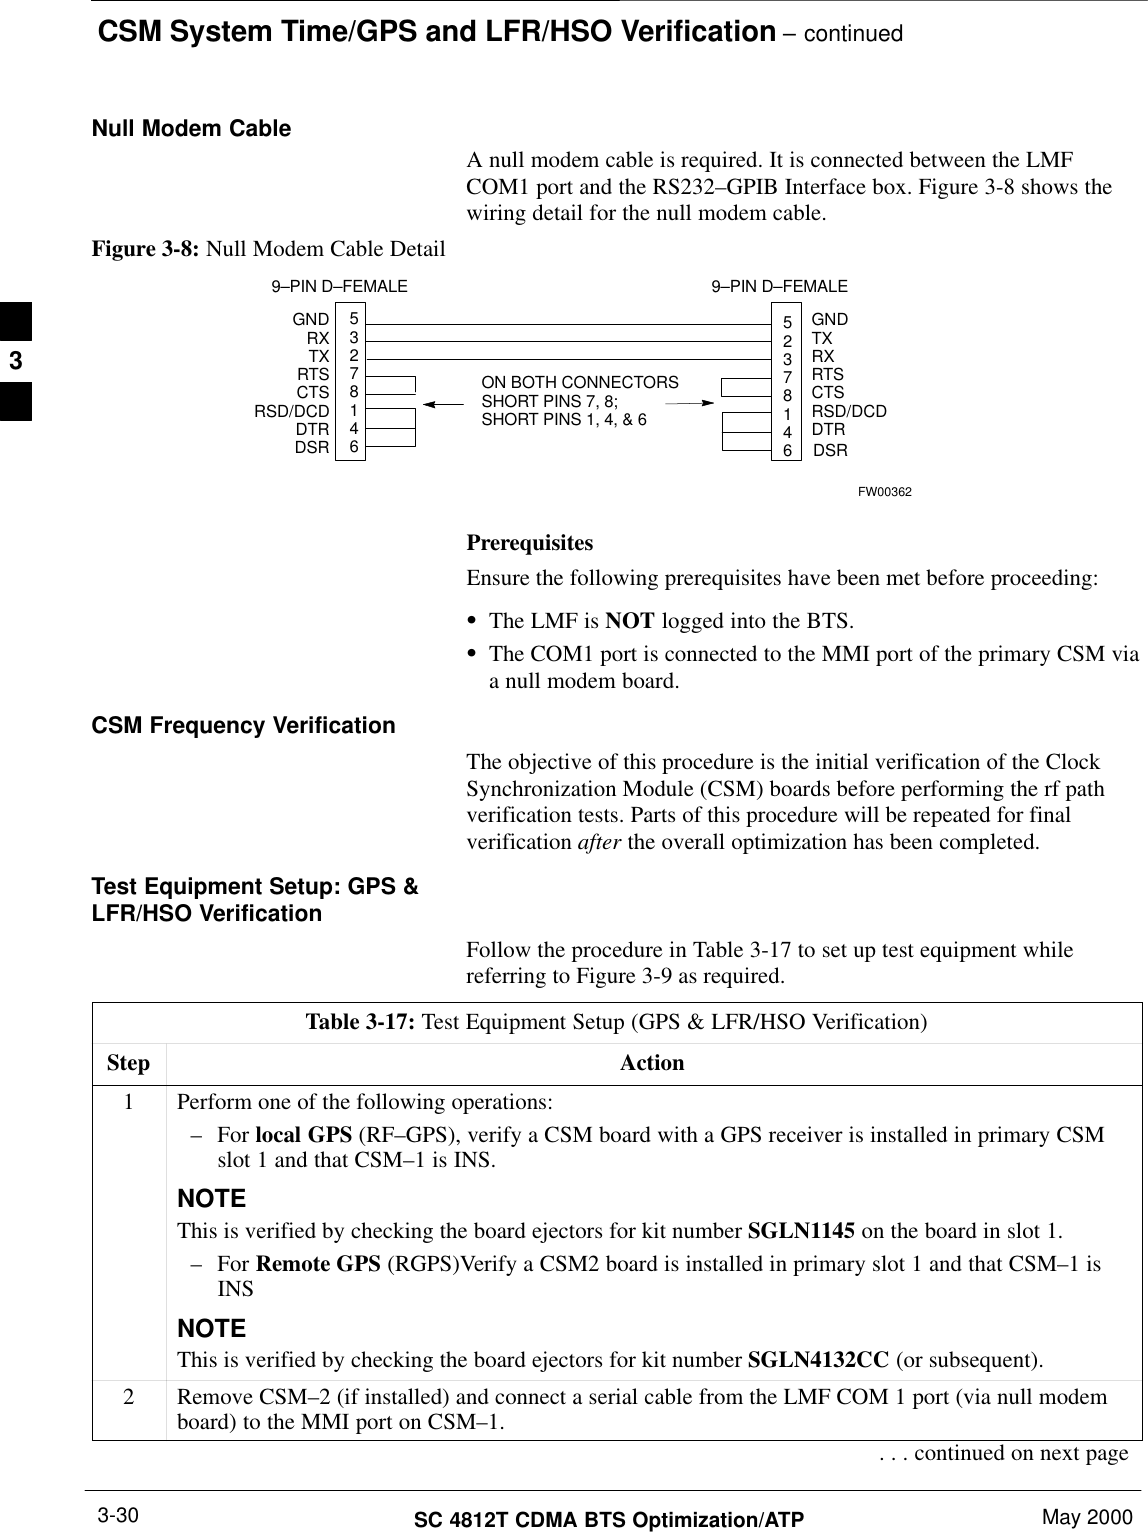 CSM System Time/GPS and LFR/HSO Verification – continuedSC 4812T CDMA BTS Optimization/ATP May 20003-30Null Modem CableA null modem cable is required. It is connected between the LMFCOM1 port and the RS232–GPIB Interface box. Figure 3-8 shows thewiring detail for the null modem cable.Figure 3-8: Null Modem Cable Detail53278146GNDRXTXRTSCTSRSD/DCDDTRGNDTXRXRTSCTSRSD/DCDDTRON BOTH CONNECTORSSHORT PINS 7, 8;SHORT PINS 1, 4, &amp; 69–PIN D–FEMALE 9–PIN D–FEMALE52378146 DSR DSRFW00362PrerequisitesEnsure the following prerequisites have been met before proceeding:SThe LMF is NOT logged into the BTS.SThe COM1 port is connected to the MMI port of the primary CSM viaa null modem board.CSM Frequency VerificationThe objective of this procedure is the initial verification of the ClockSynchronization Module (CSM) boards before performing the rf pathverification tests. Parts of this procedure will be repeated for finalverification after the overall optimization has been completed.Test Equipment Setup: GPS &amp;LFR/HSO VerificationFollow the procedure in Table 3-17 to set up test equipment whilereferring to Figure 3-9 as required.Table 3-17: Test Equipment Setup (GPS &amp; LFR/HSO Verification)Step Action1Perform one of the following operations:– For local GPS (RF–GPS), verify a CSM board with a GPS receiver is installed in primary CSMslot 1 and that CSM–1 is INS.NOTEThis is verified by checking the board ejectors for kit number SGLN1145 on the board in slot 1.– For Remote GPS (RGPS)Verify a CSM2 board is installed in primary slot 1 and that CSM–1 isINSNOTEThis is verified by checking the board ejectors for kit number SGLN4132CC (or subsequent).2Remove CSM–2 (if installed) and connect a serial cable from the LMF COM 1 port (via null modemboard) to the MMI port on CSM–1.. . . continued on next page3